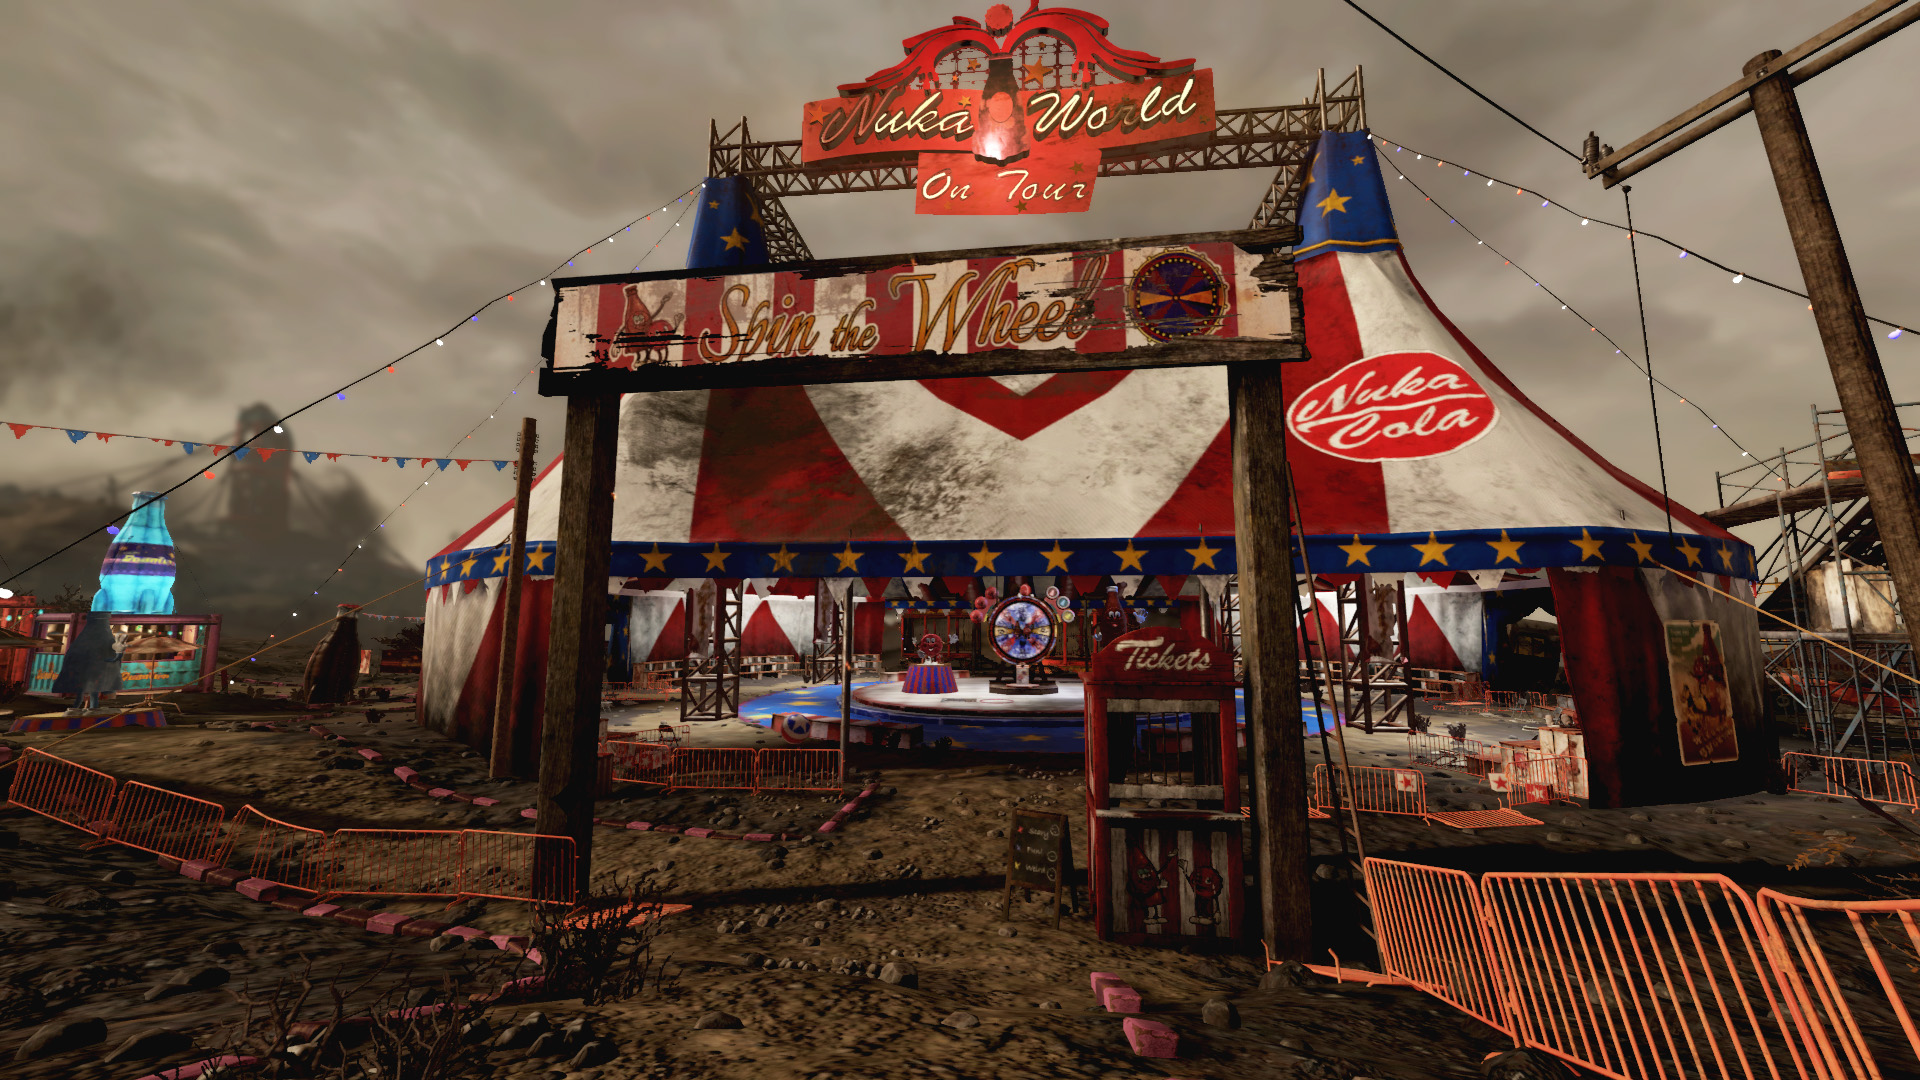 76 Nuka World on Tour Big Top Tent Spin the Wheel 1920x1080